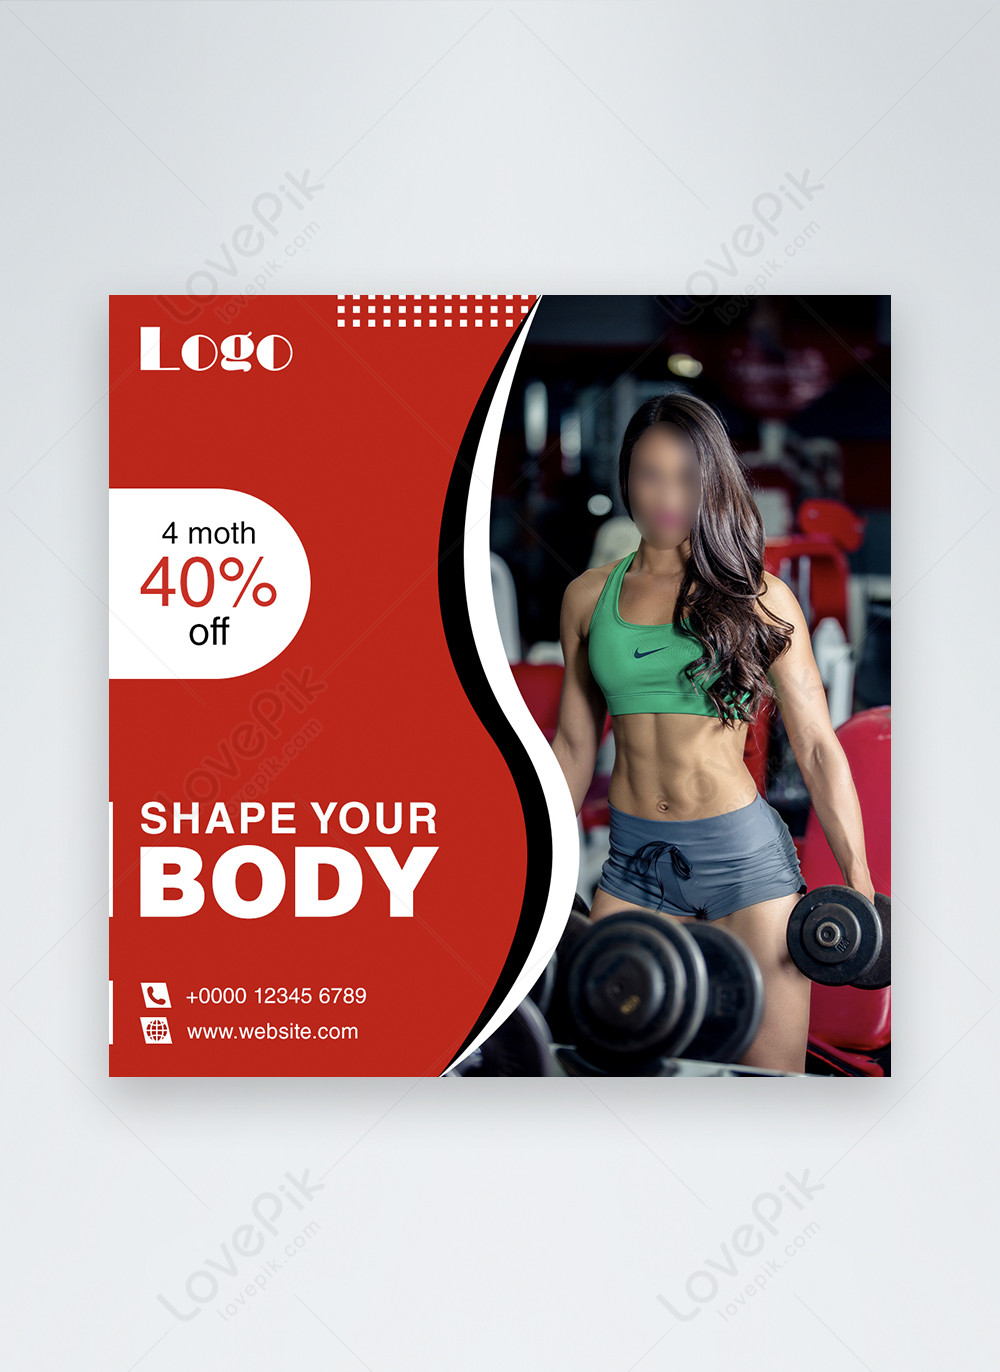 Fitness Gym Promotion Social Media Post And Web Banner Template Image Picture Free Download Lovepik Com